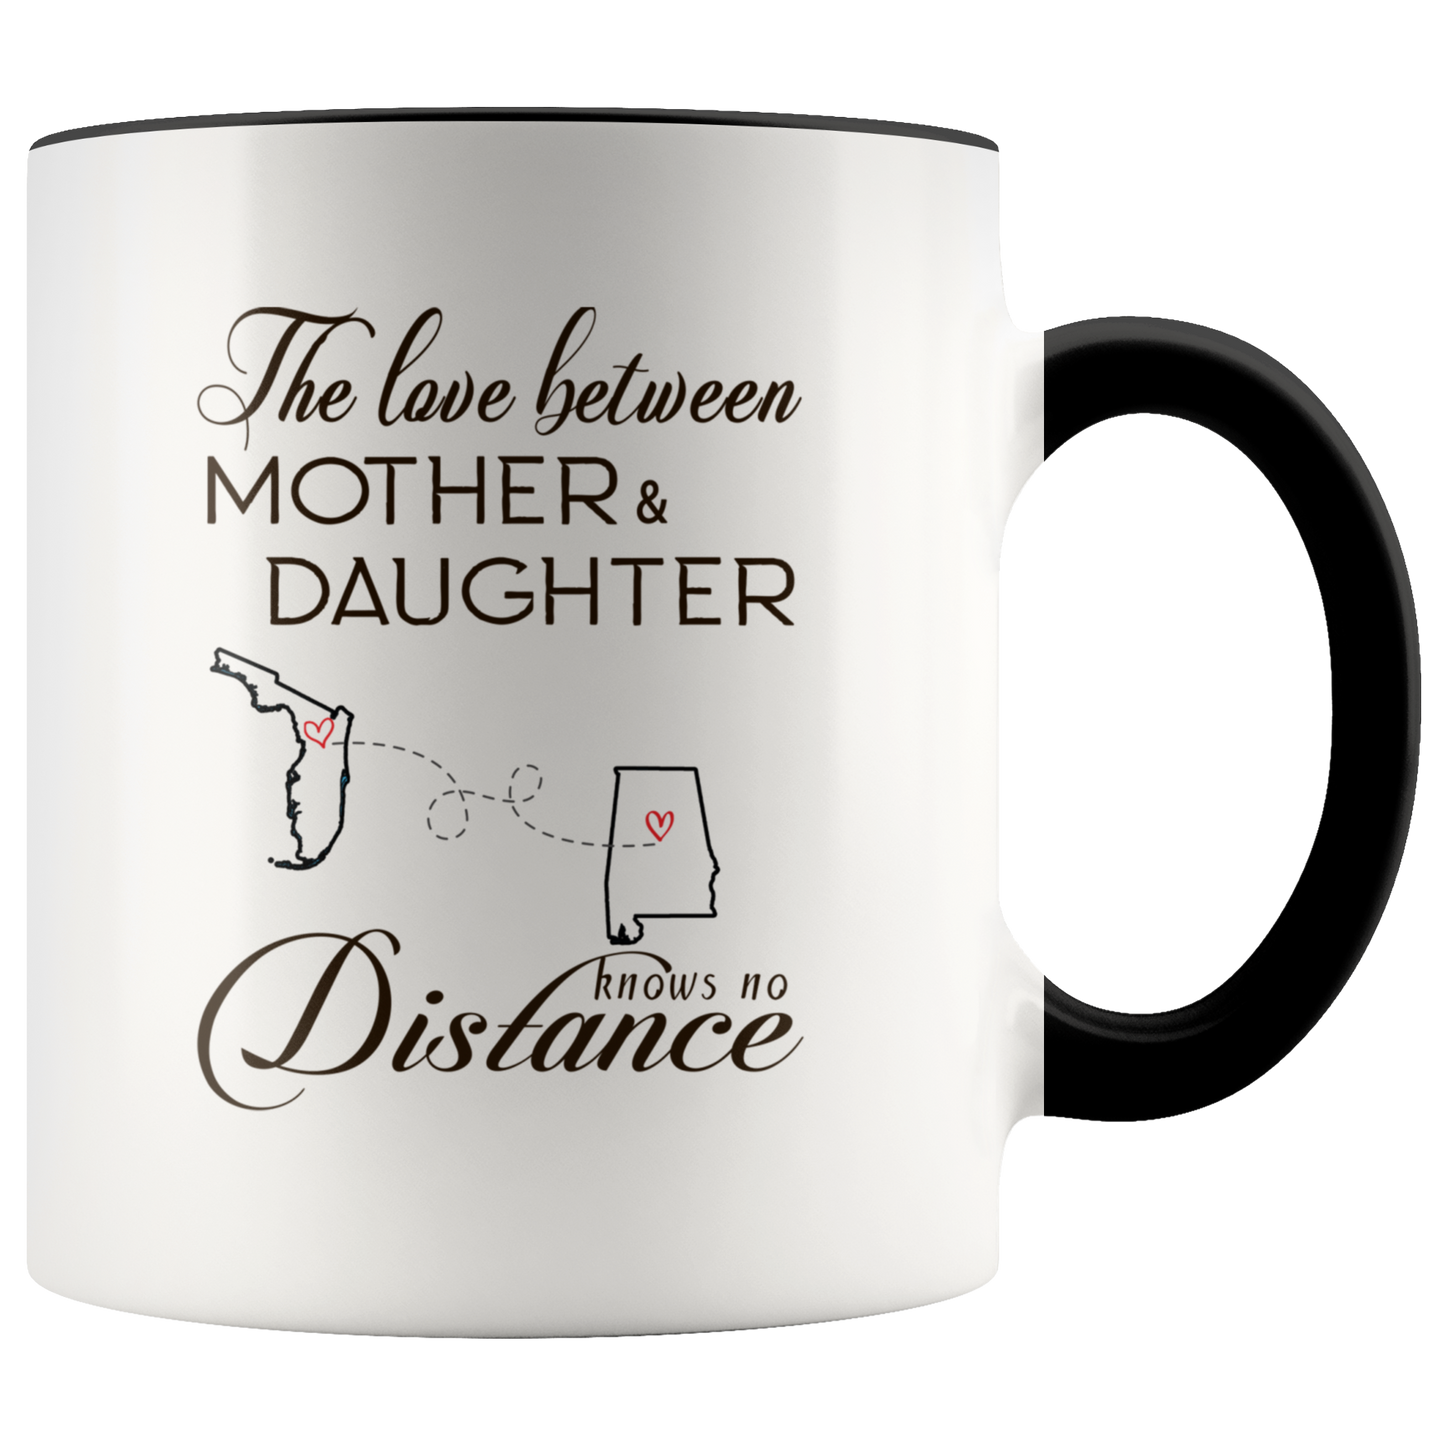 ND-21334465-sp-23396 - Long Distance Accent Mug 11 oz Red - The Love Between Mother